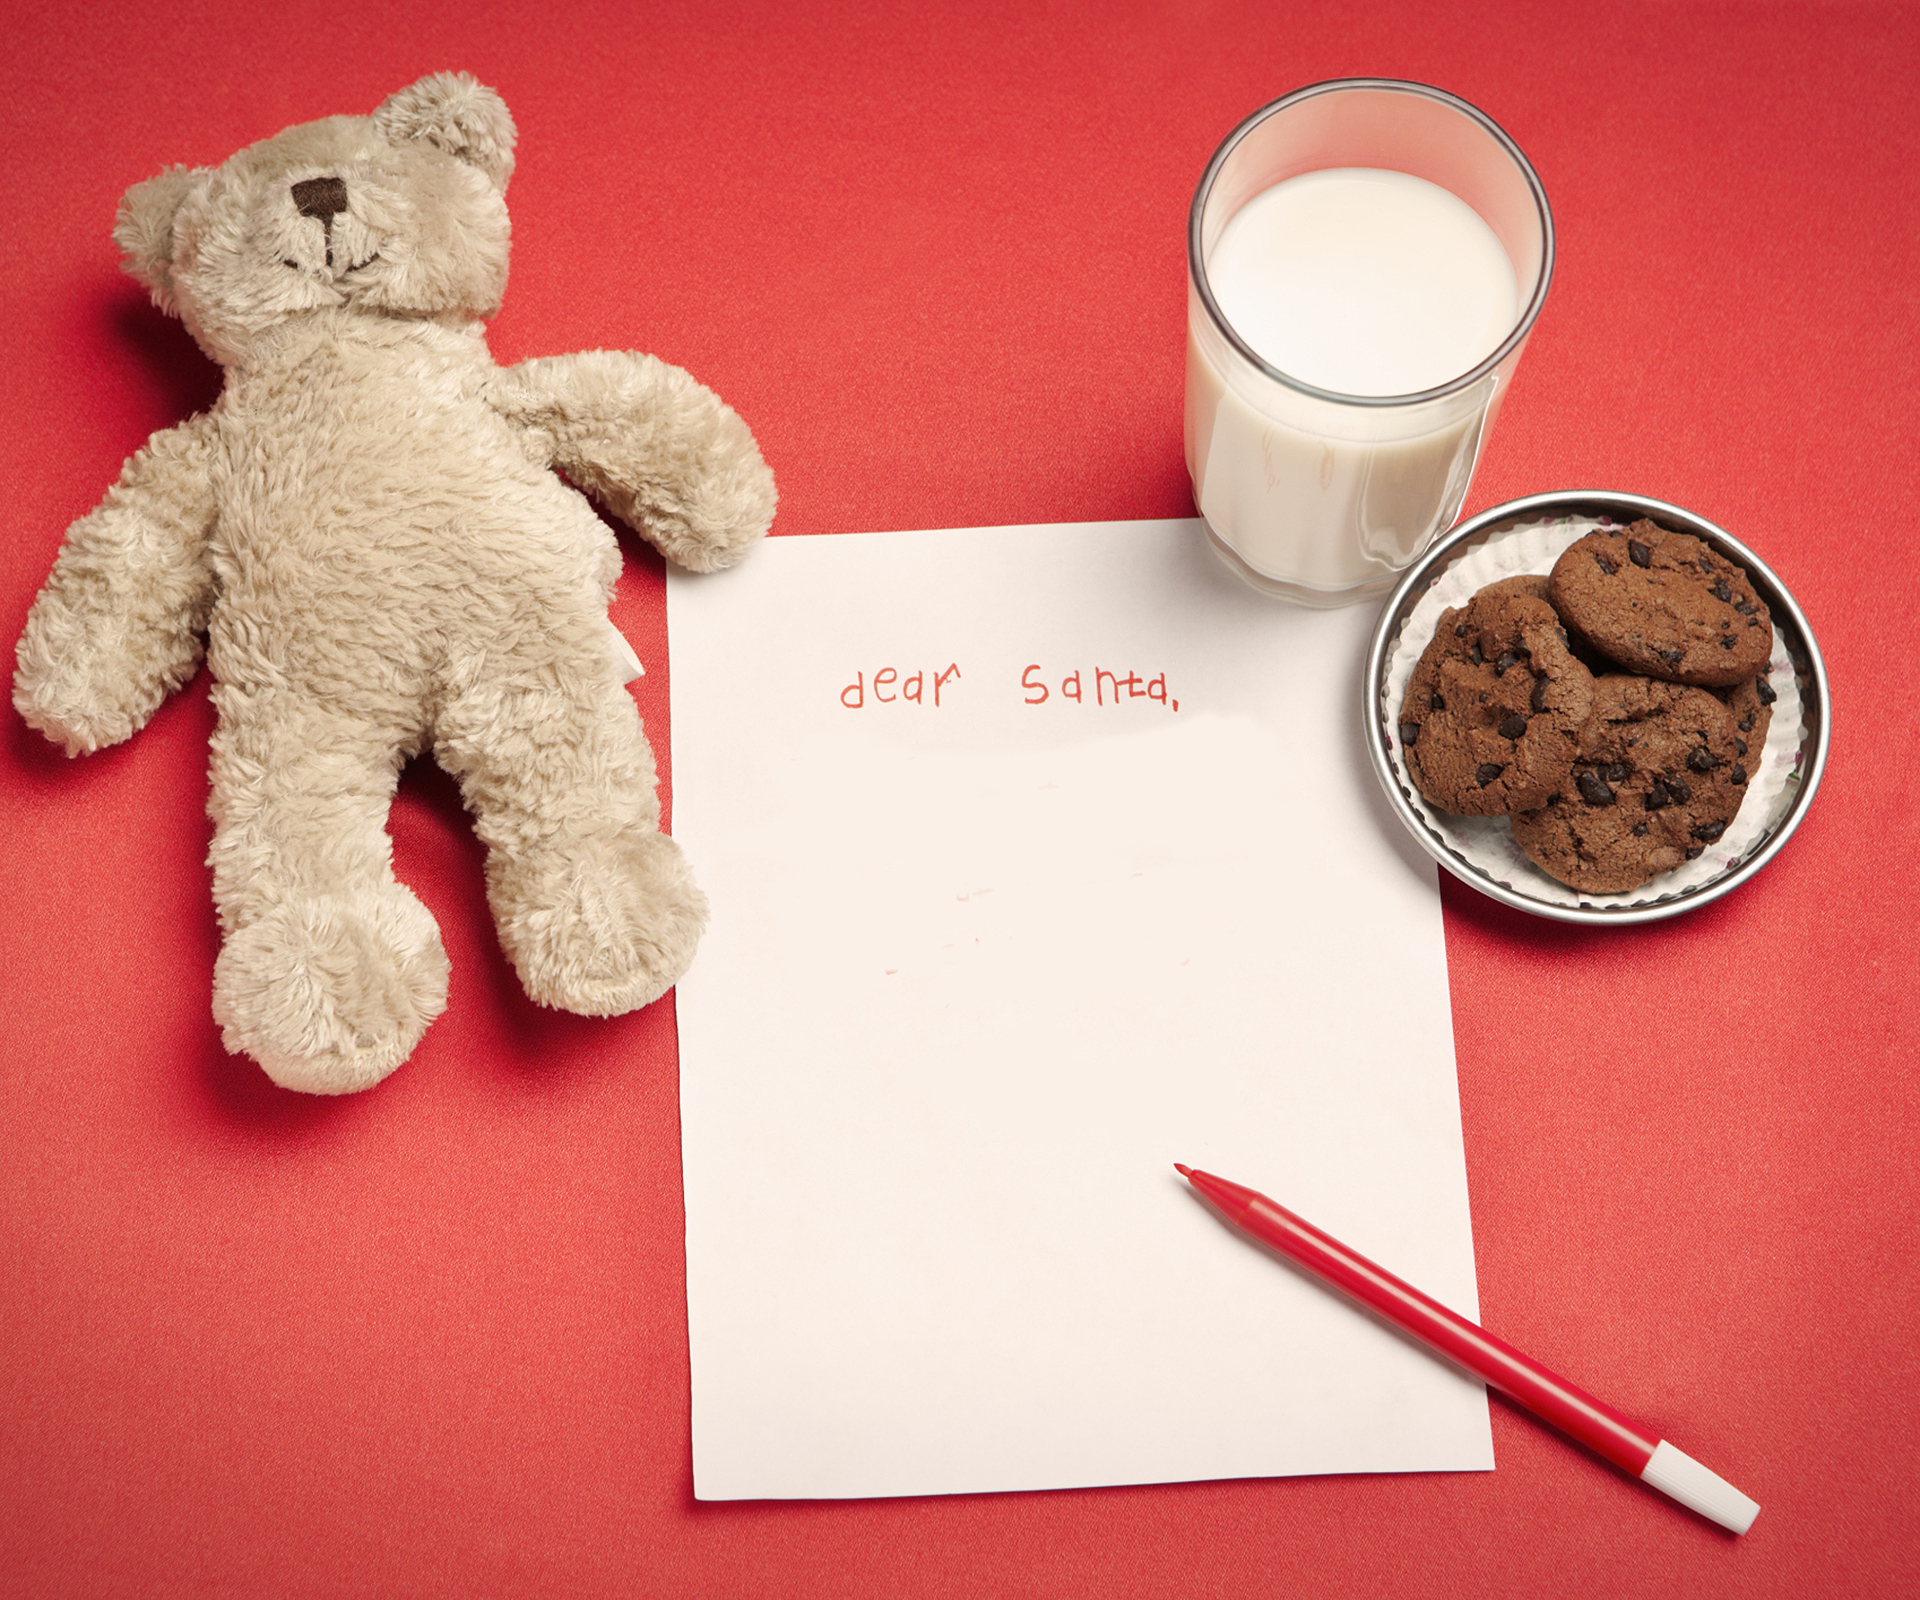 The 15 most hilarious Santa gift requests from kids